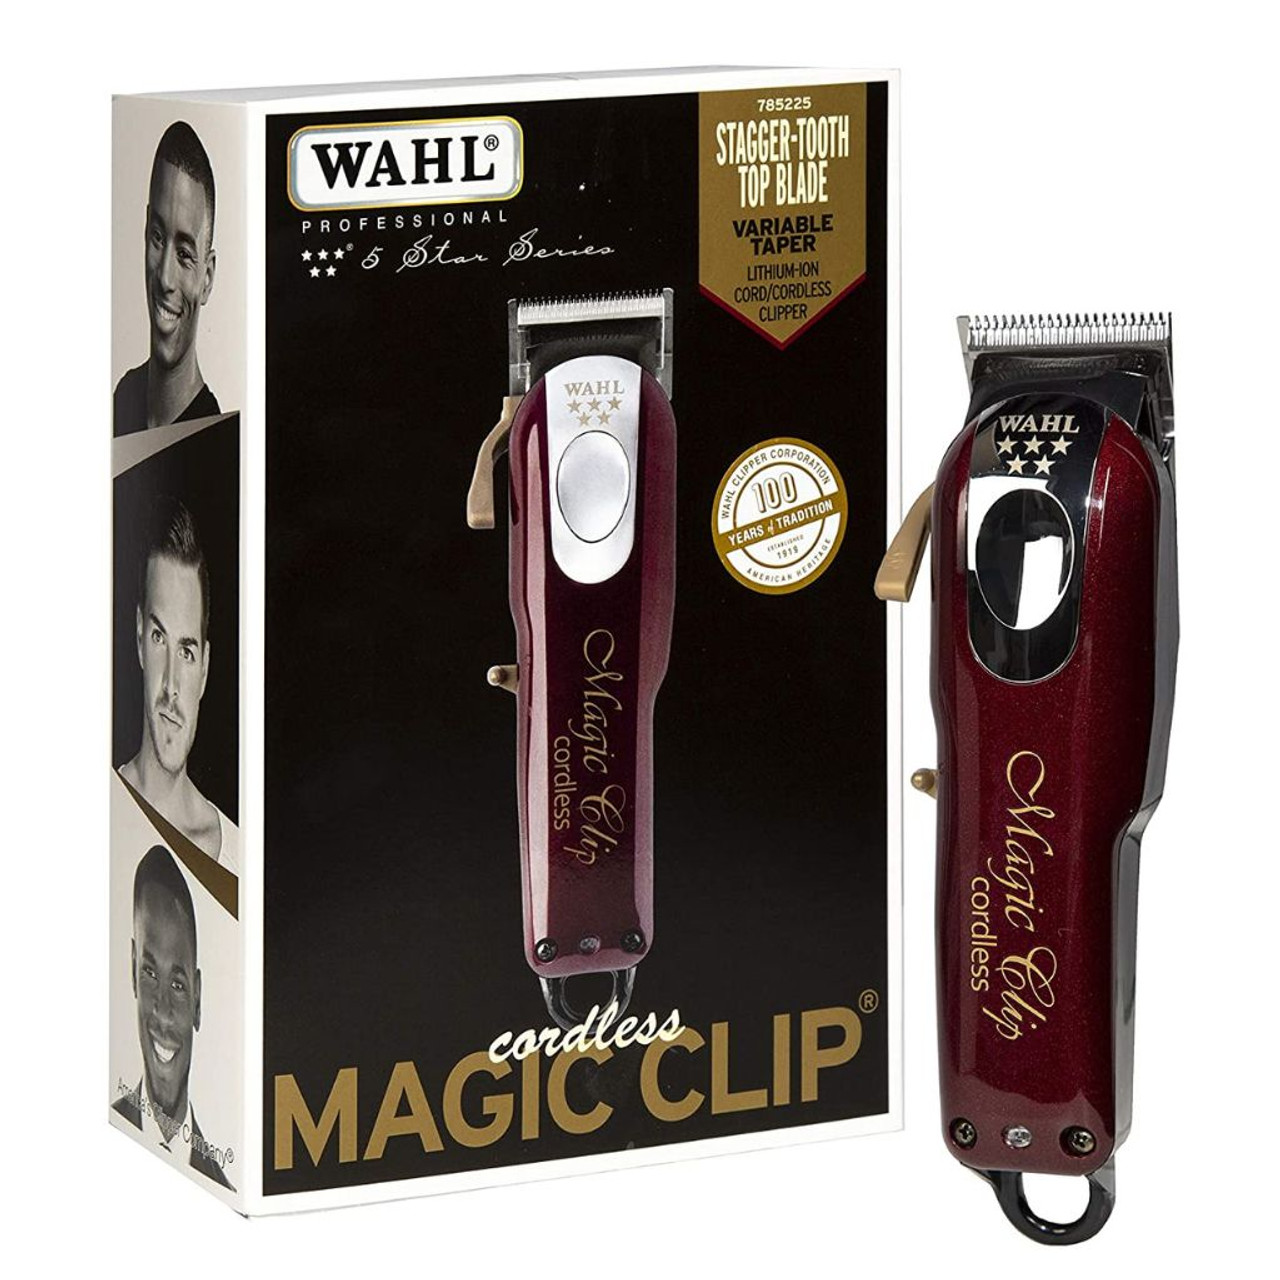 Wahl® Professional Cord/Cordless Magic Clip product image